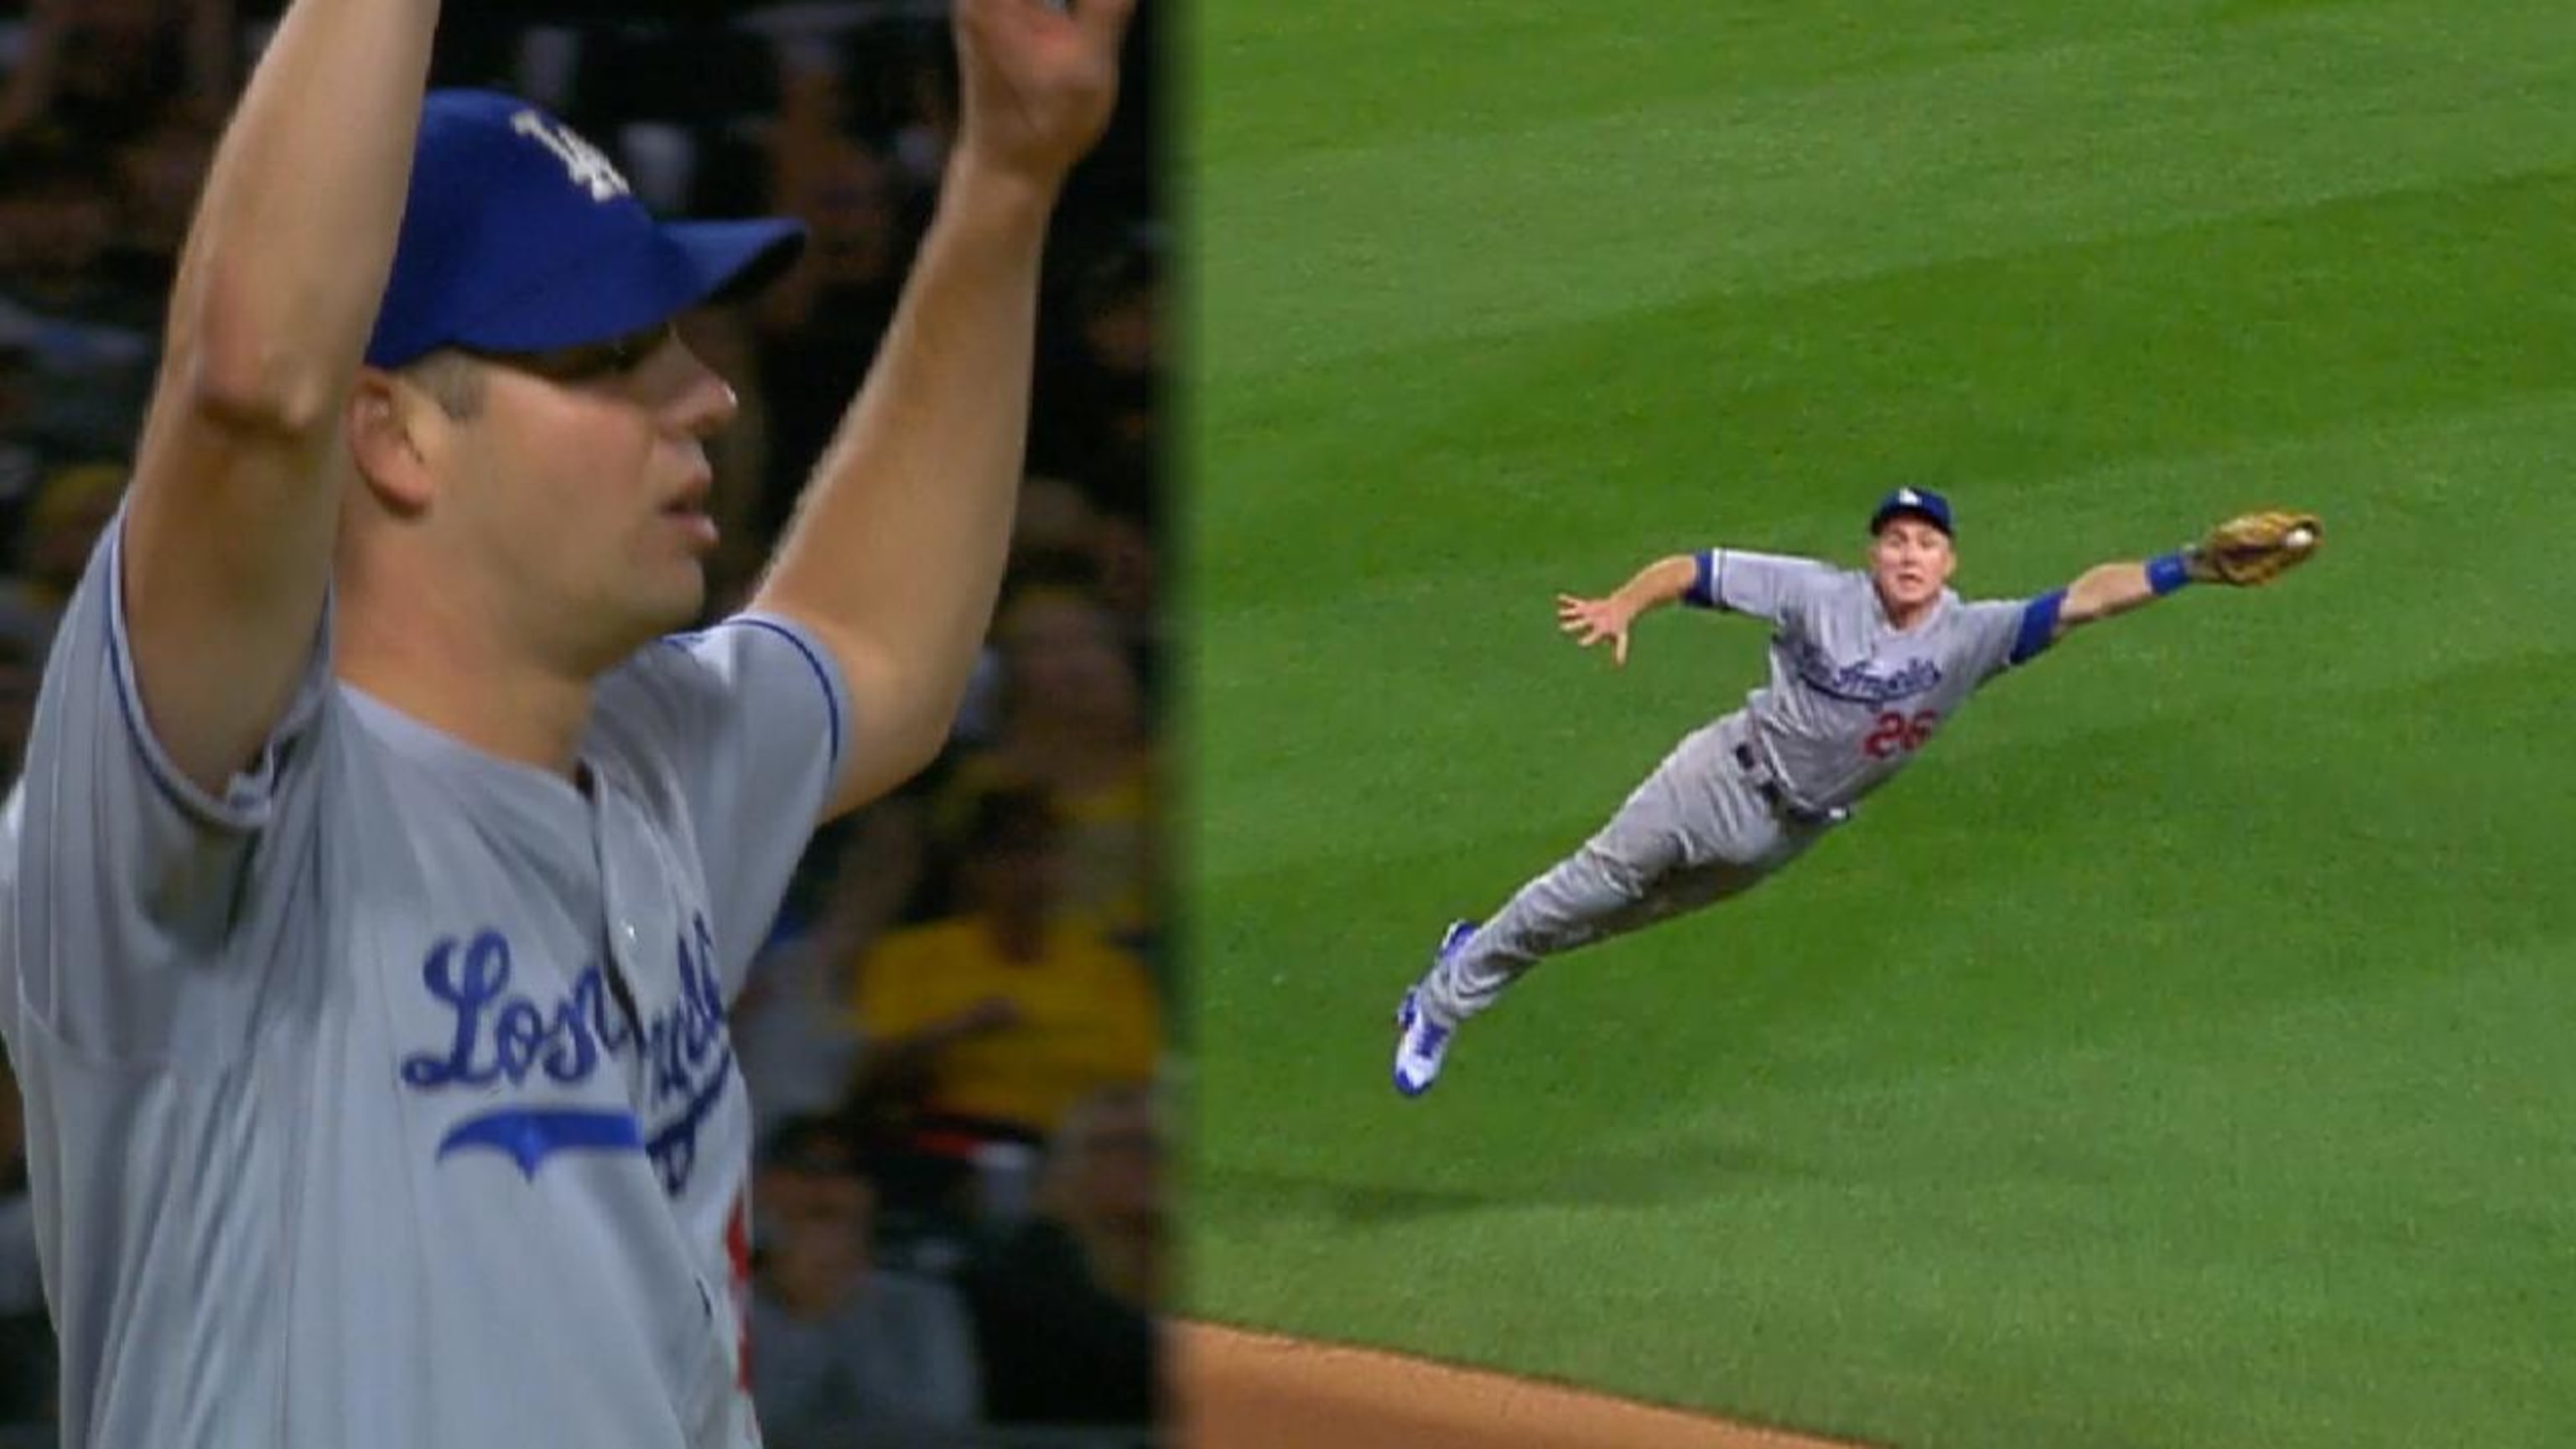 Silver Fox' Chase Utley preserved Rich Hill's perfect game bid